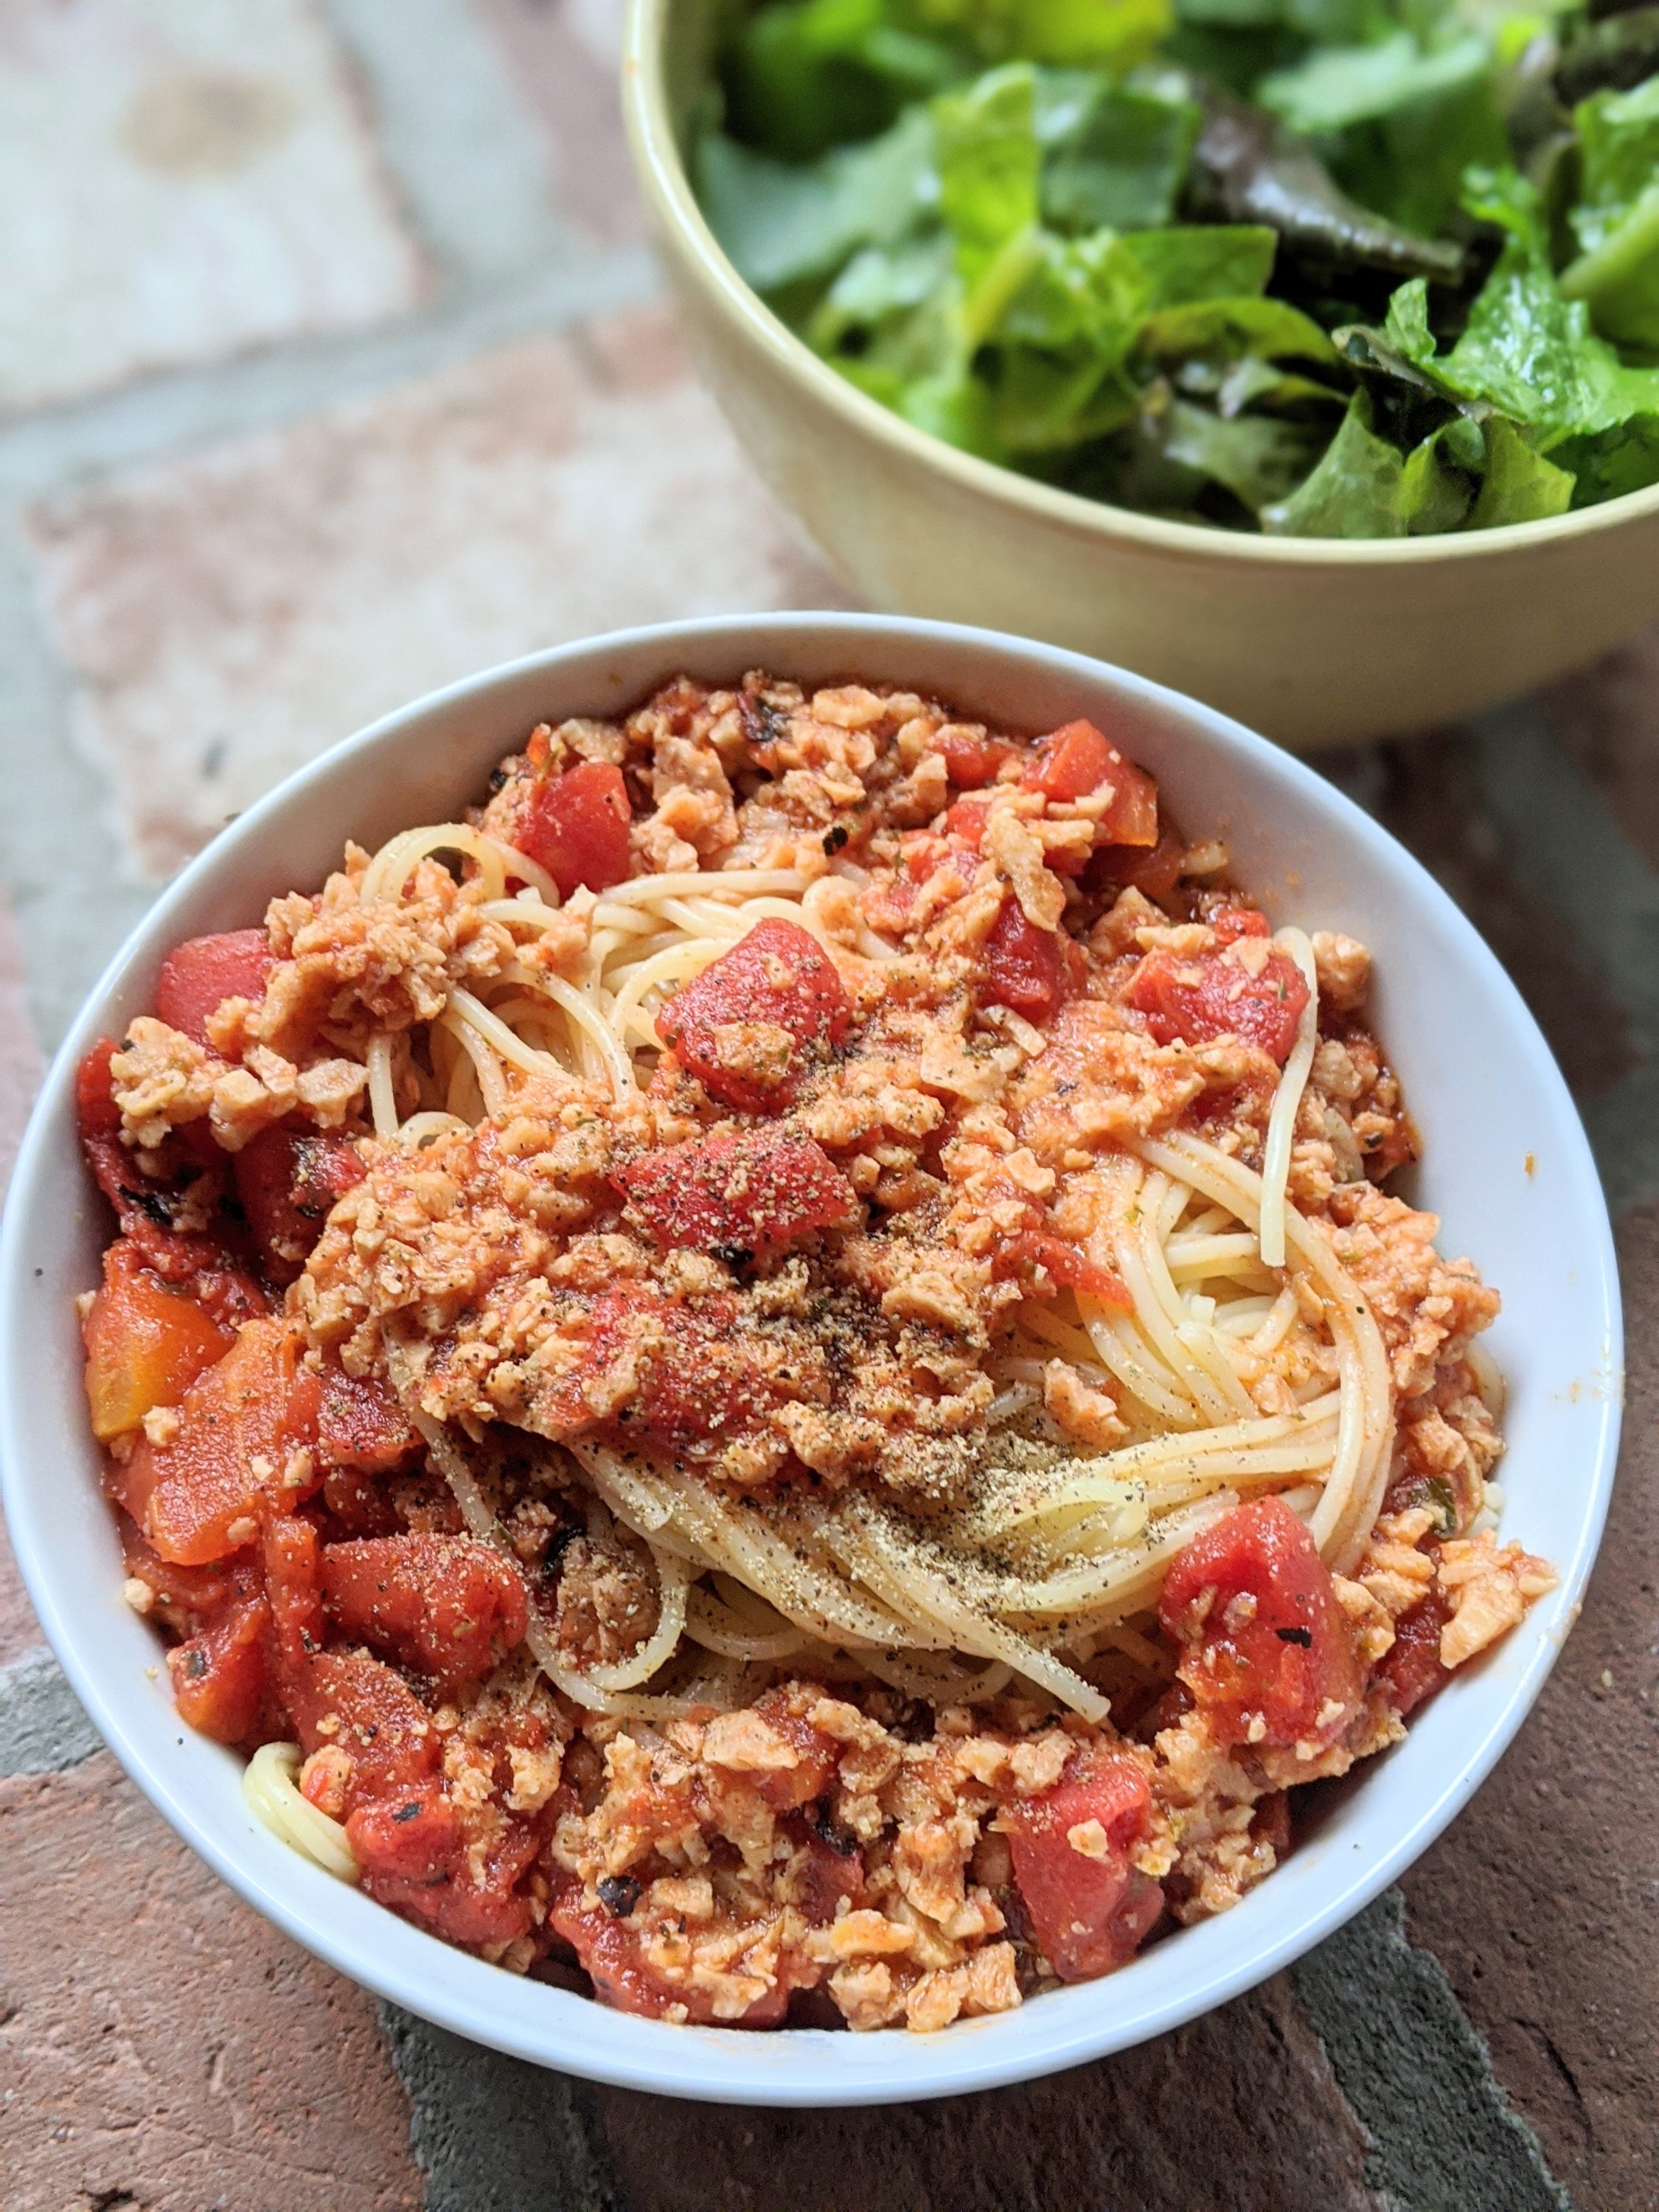 tvp meat sauce vegetarian meat sauce for pasta vegan spag bol sauce with tvp spaghetti Bolognese with textured vegetable protein gluten free pasta sauce tomato sauce with tvp